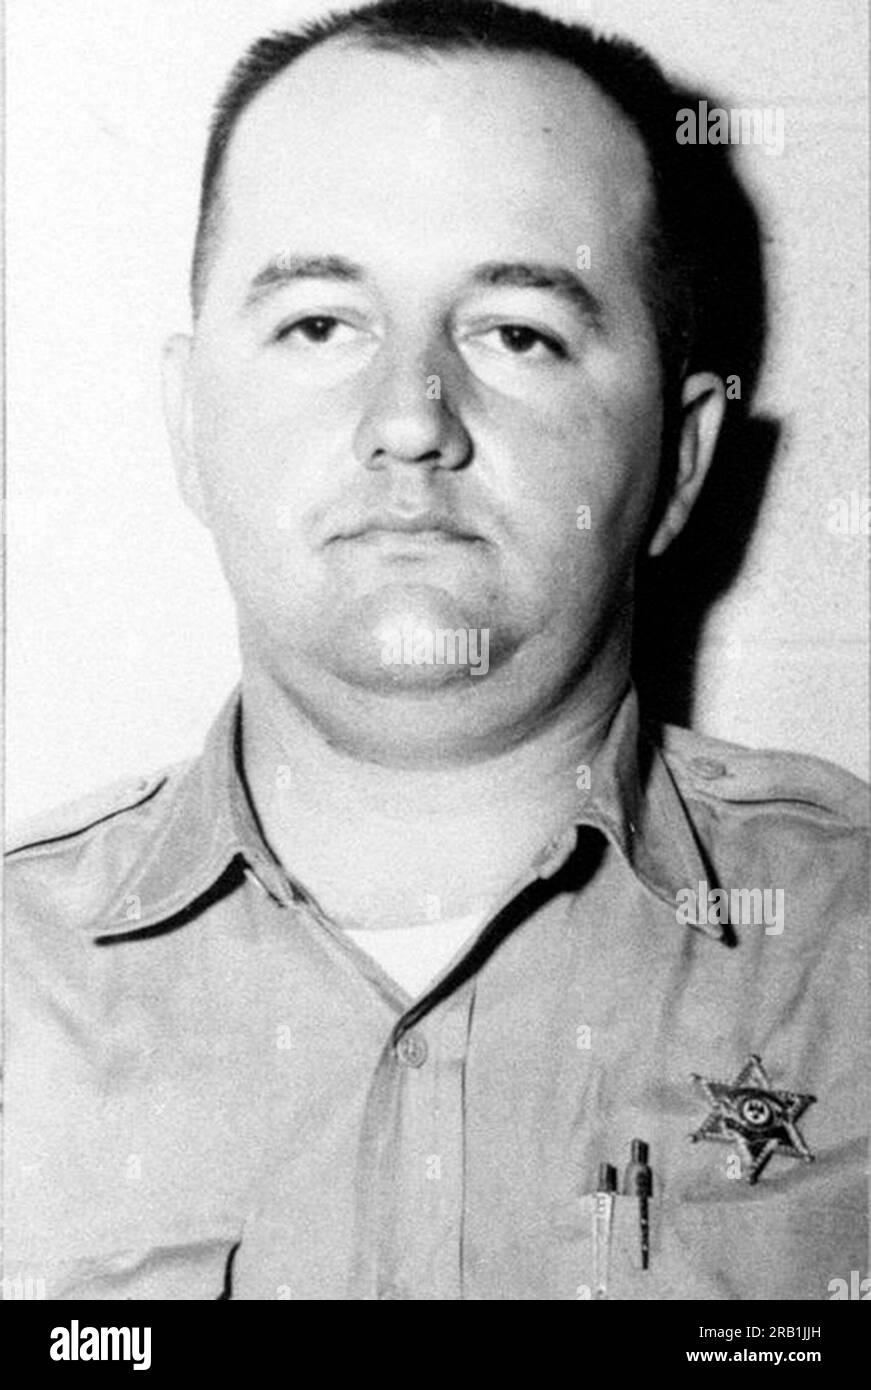 Cecil Ray Price (1938 –  2001) American police officer and white supremacist. He was accused of having taken part in the murders of Chaney, Goodman, and Schwerner in 1964. Stock Photo